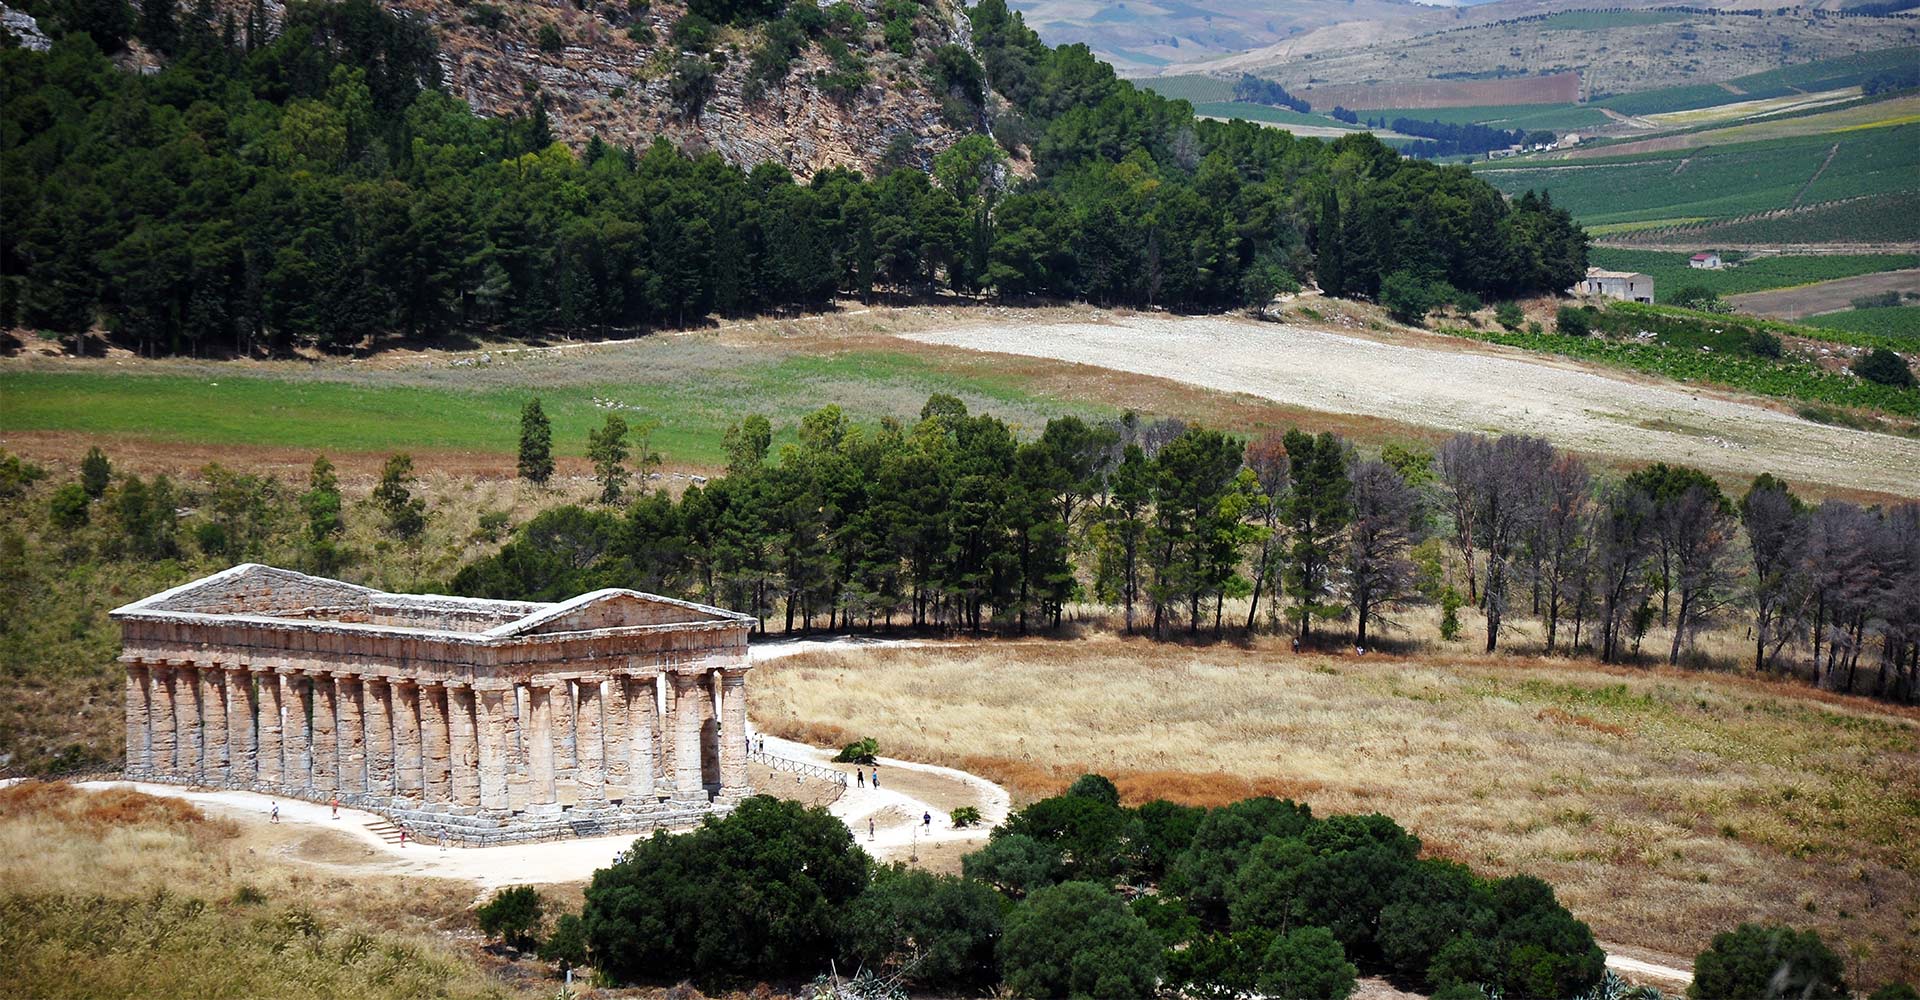 TEMPLE OF SEGESTA AND HILLS